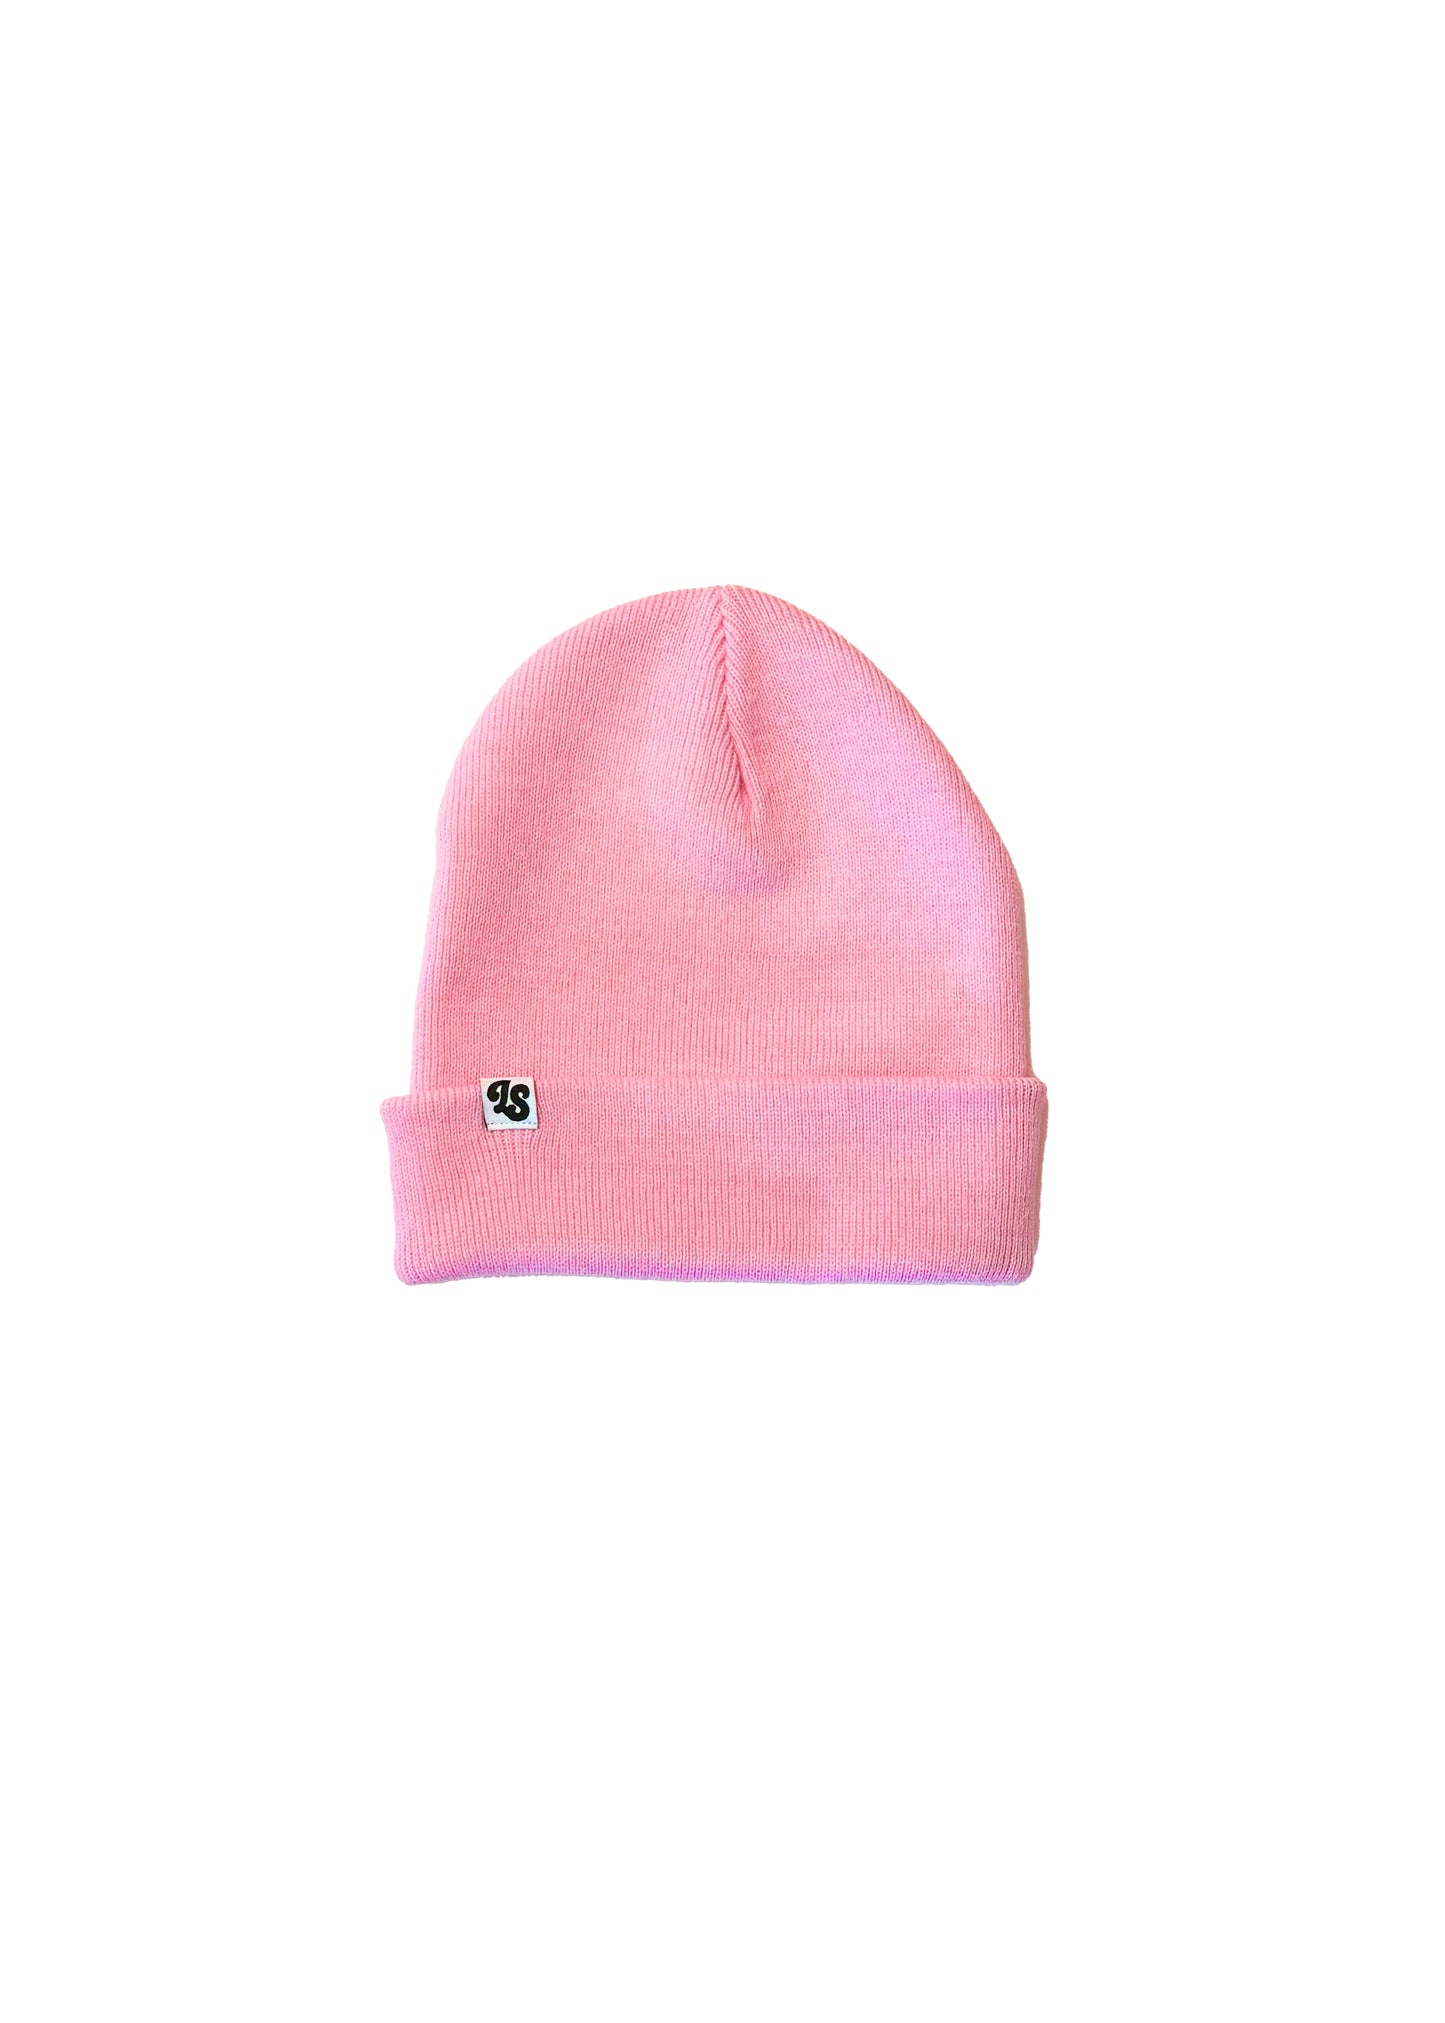 Adult Baby Pink Beanie